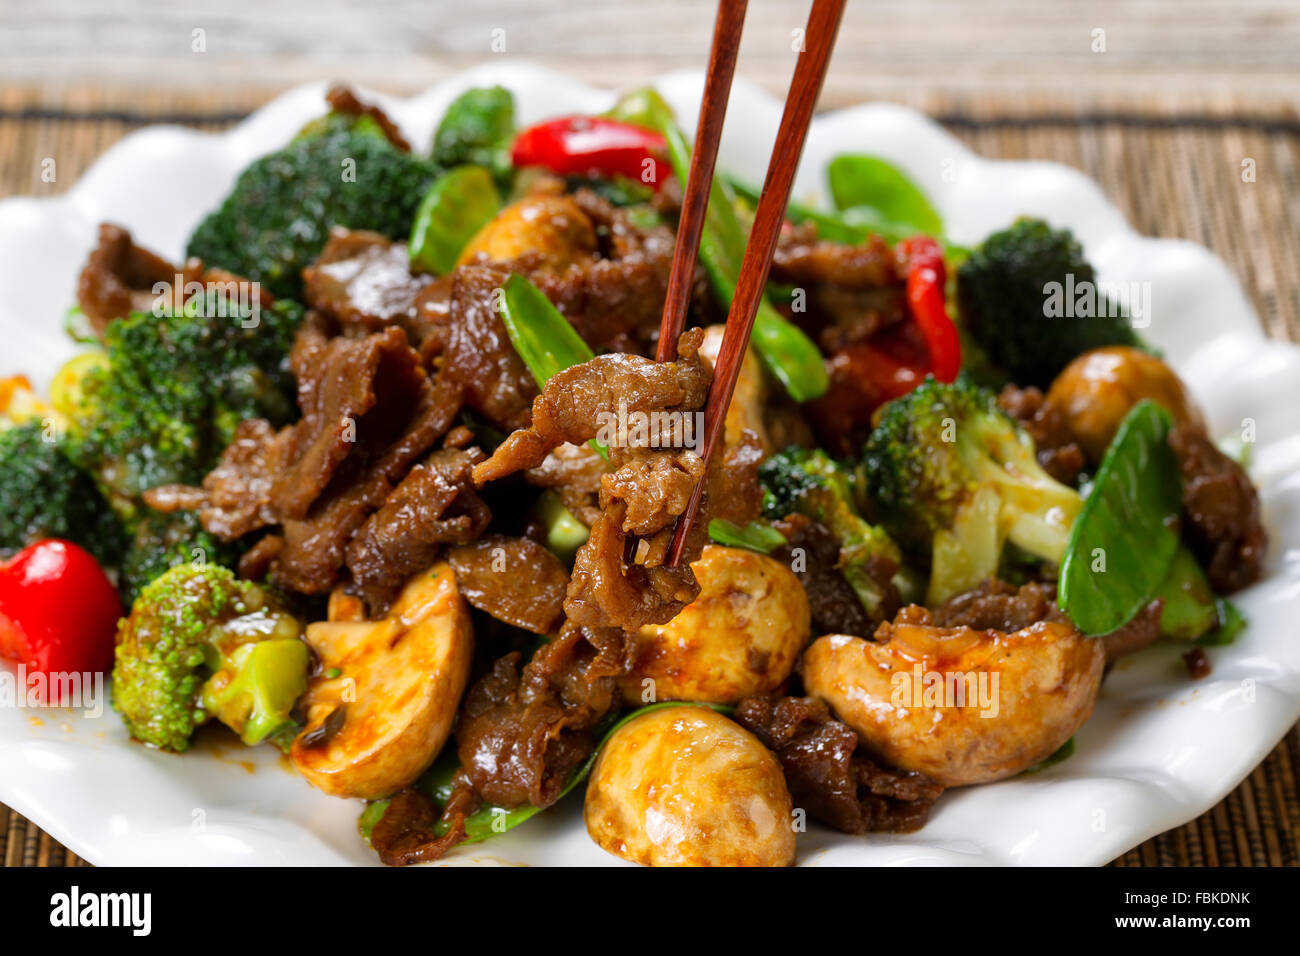 Close up view of tender beef slices, mushrooms, broccoli, peppers and peas in white plate. Stock Photo